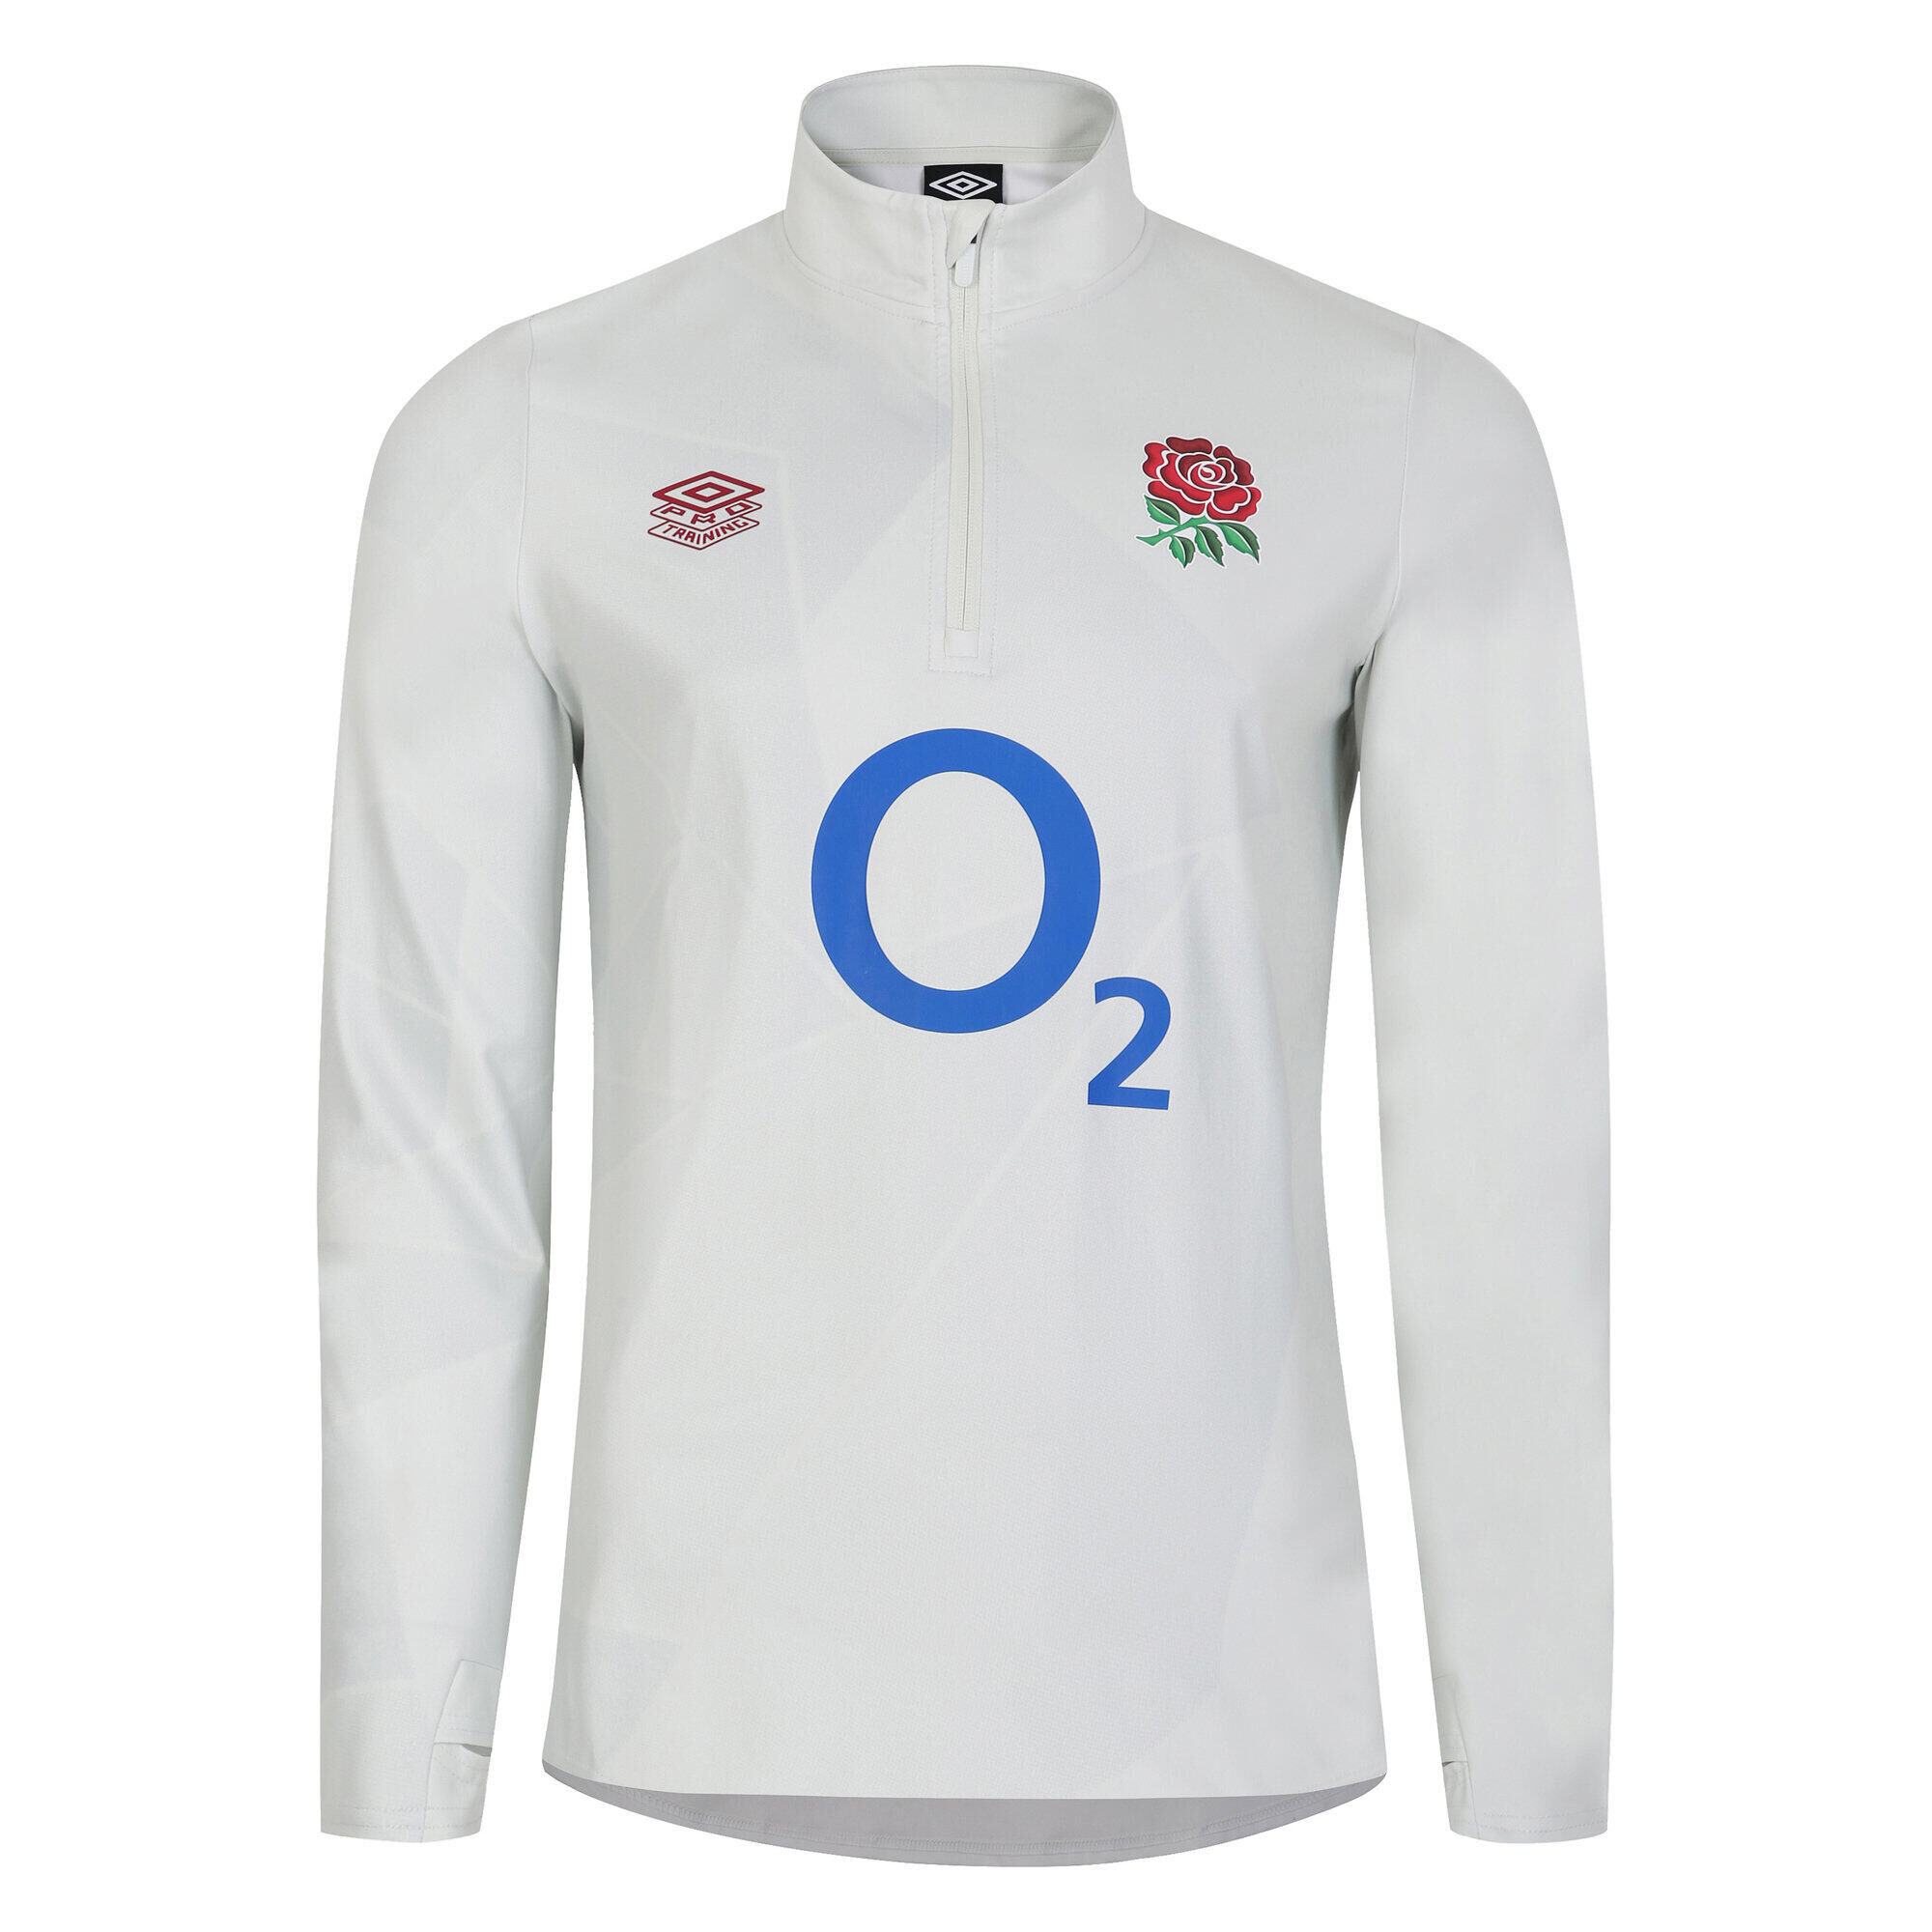 UMBRO Mens 23/24 England Rugby Warm Up Midlayer (Brilliant White/Wan Blue)